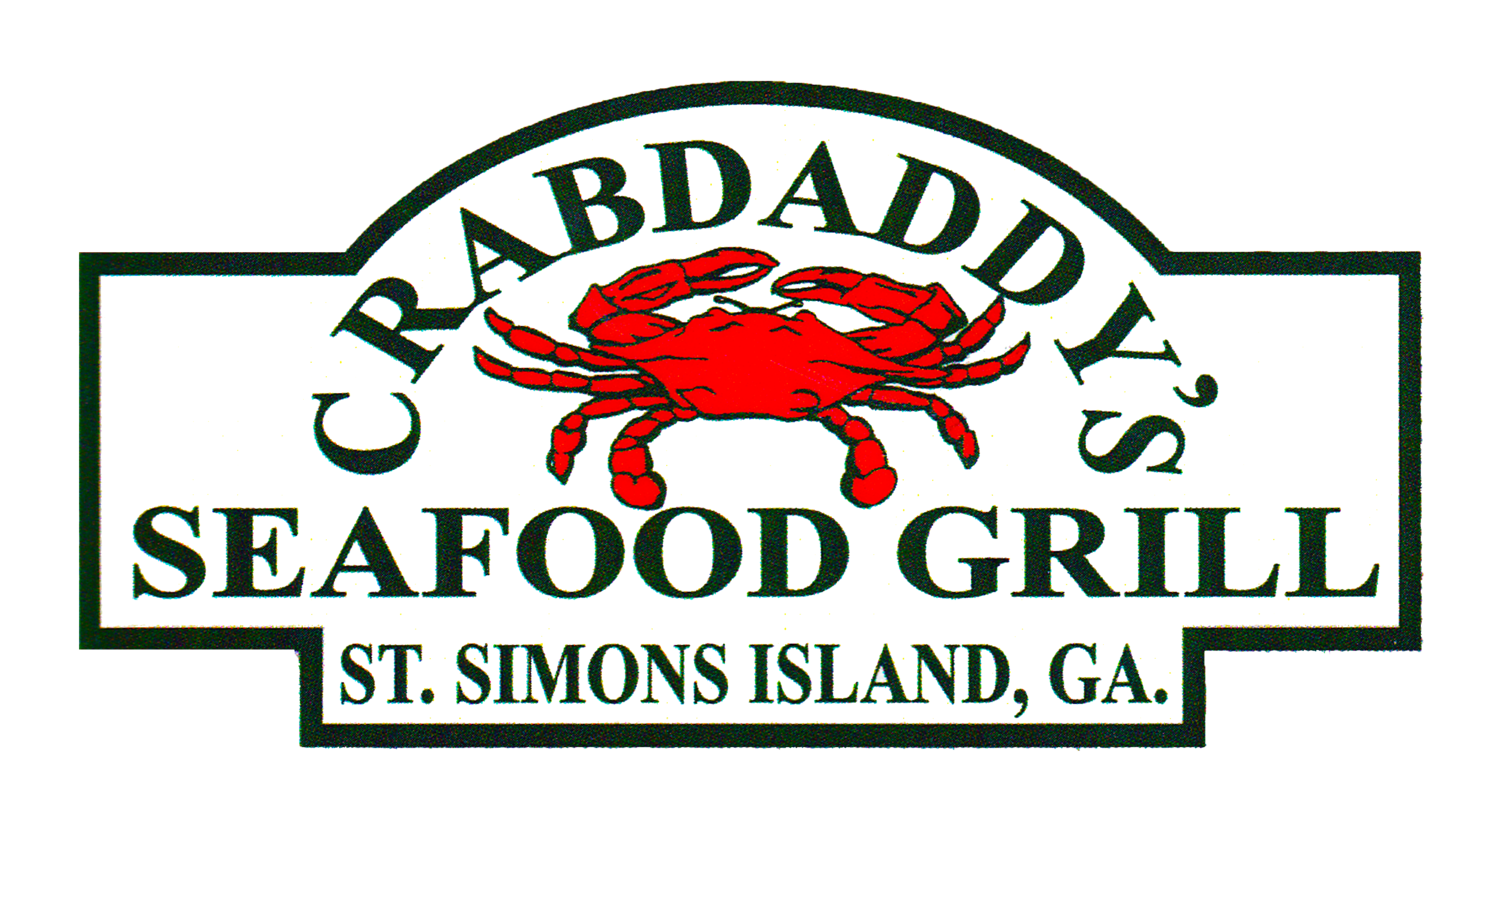 Crabdaddy's Seafood Grill